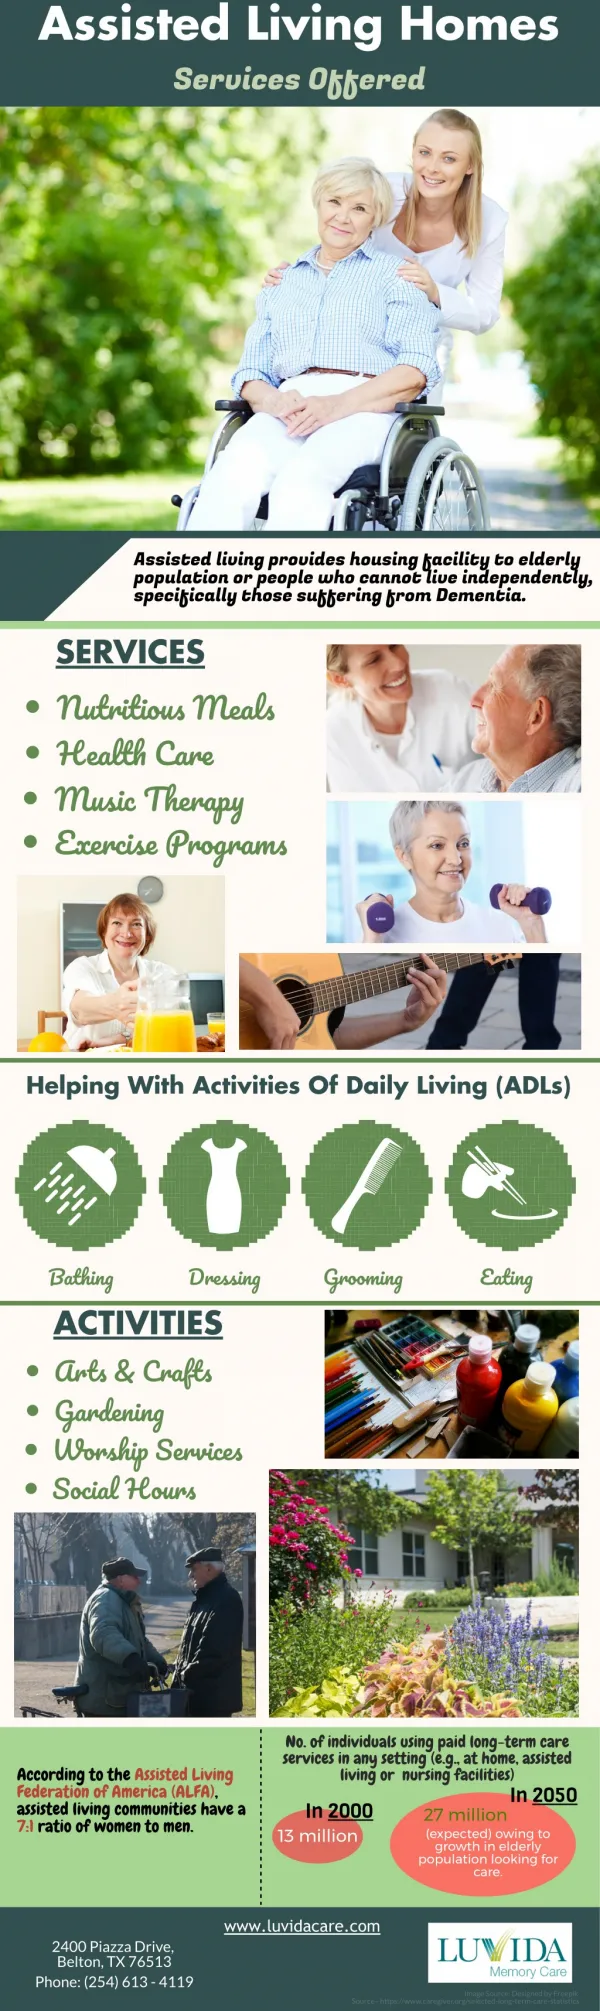 Assisted Living Homes Services Offered